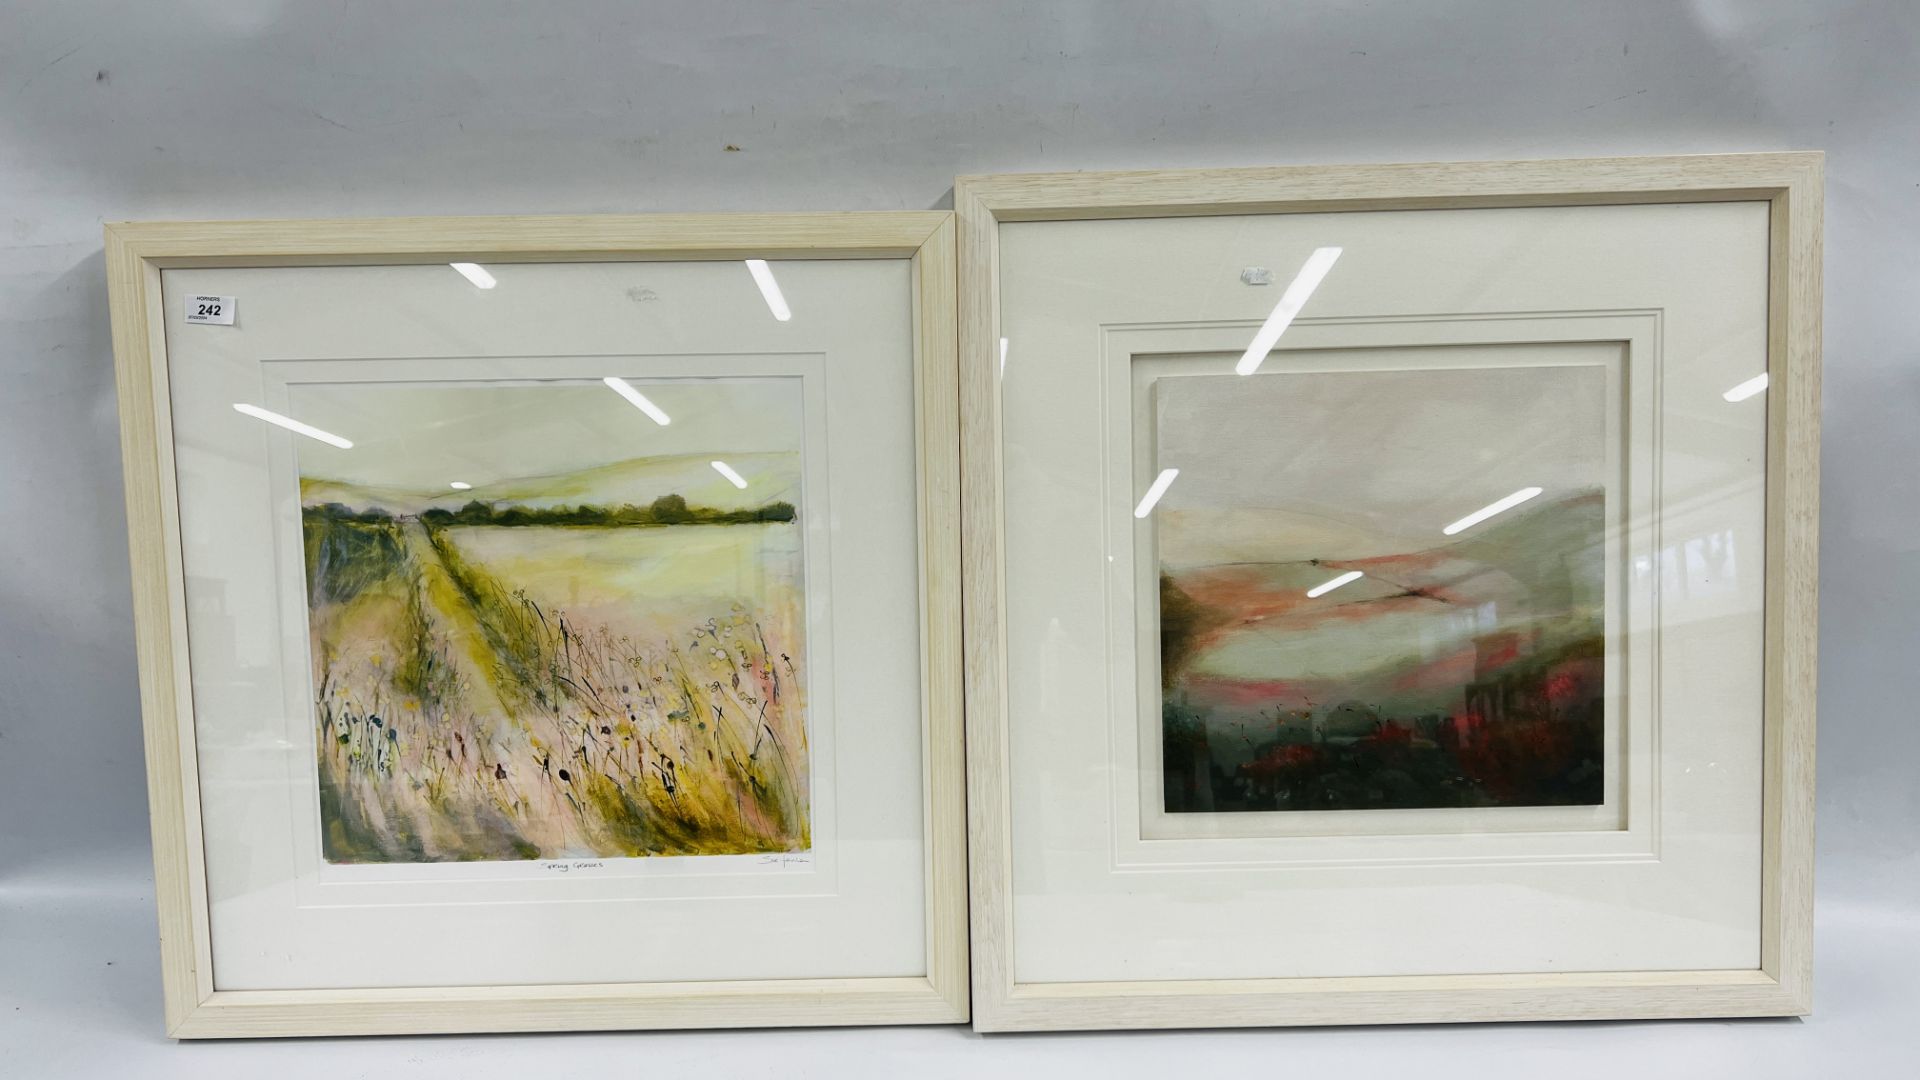 FRAMED AND MOUNTED OIL ON CANVAS HEATHER ON THE CHEVIOTS BY SUE FENLON + FRAMED AND MOUNTED PRINT